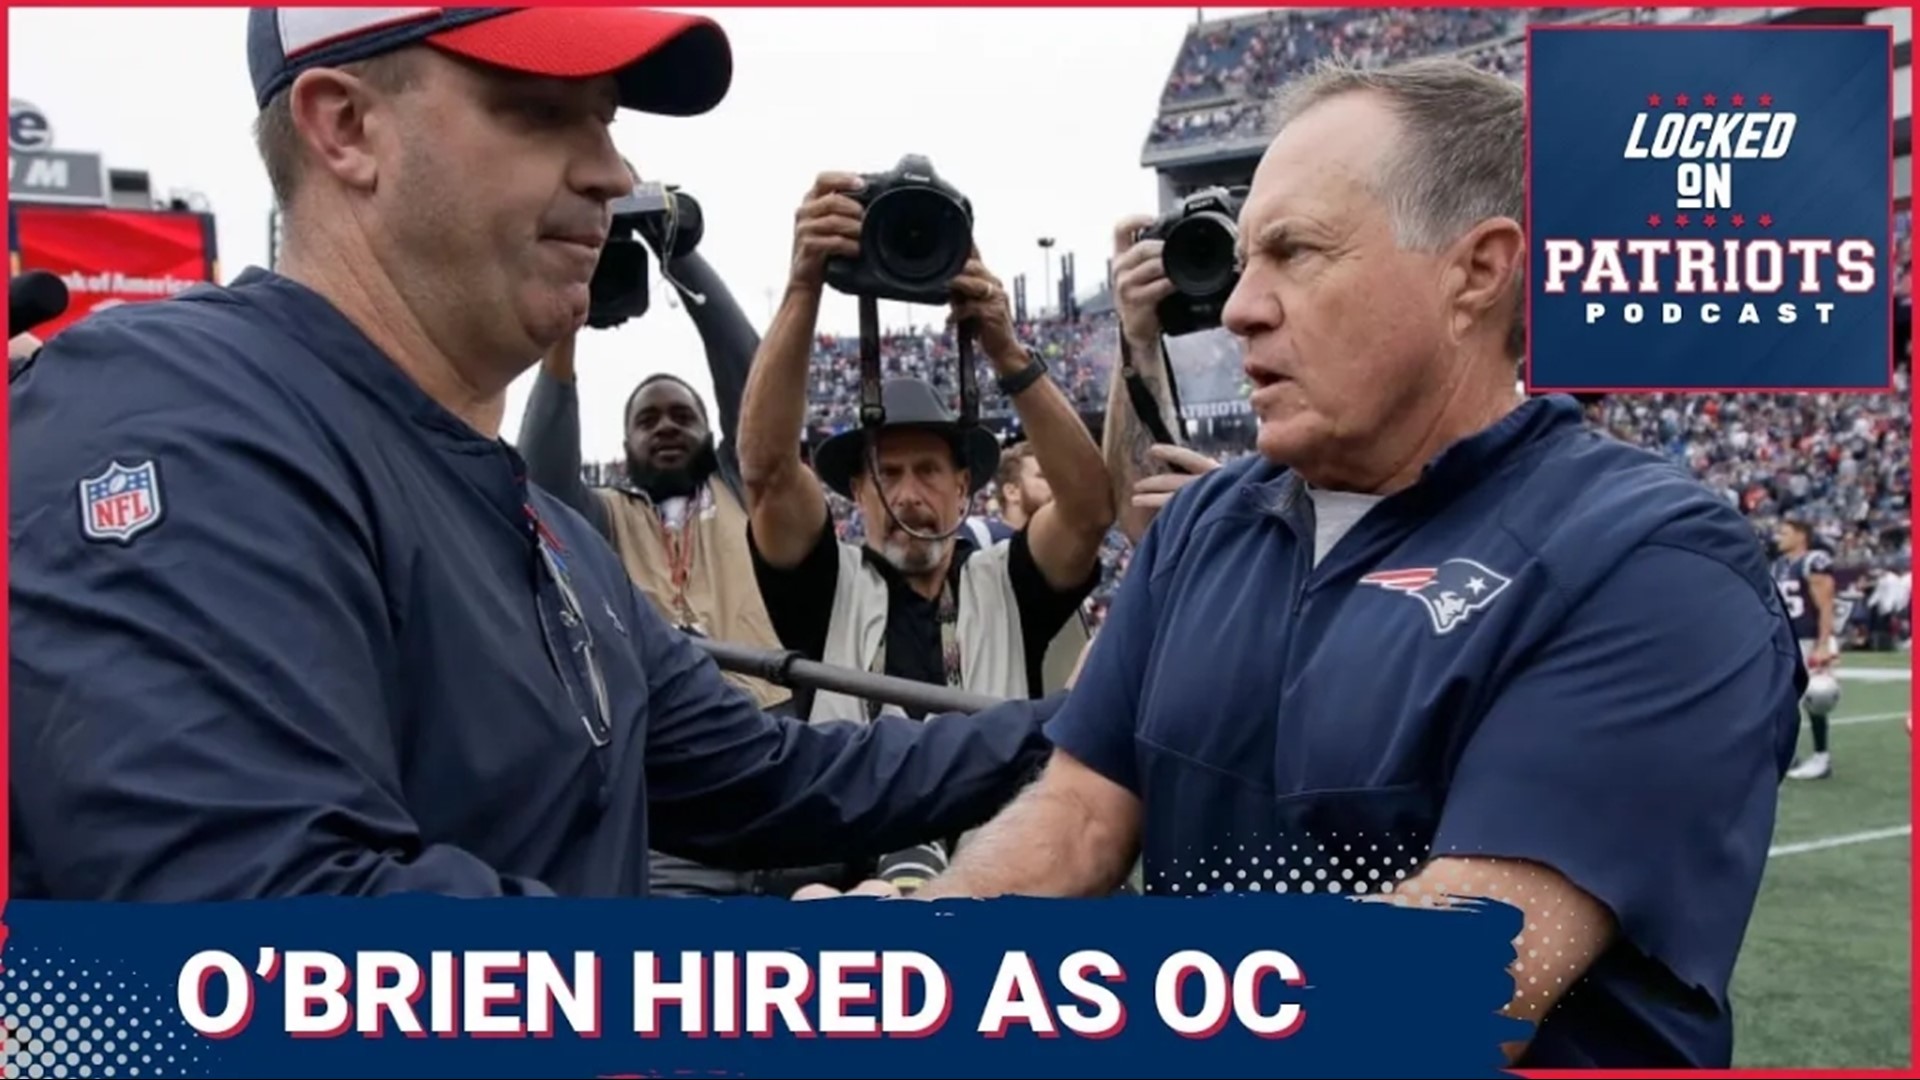 The New England Patriots' search for a new offensive coordinator is over. Bill O’Brien is back in the Foxboro fold and excitement is high among the fan base.